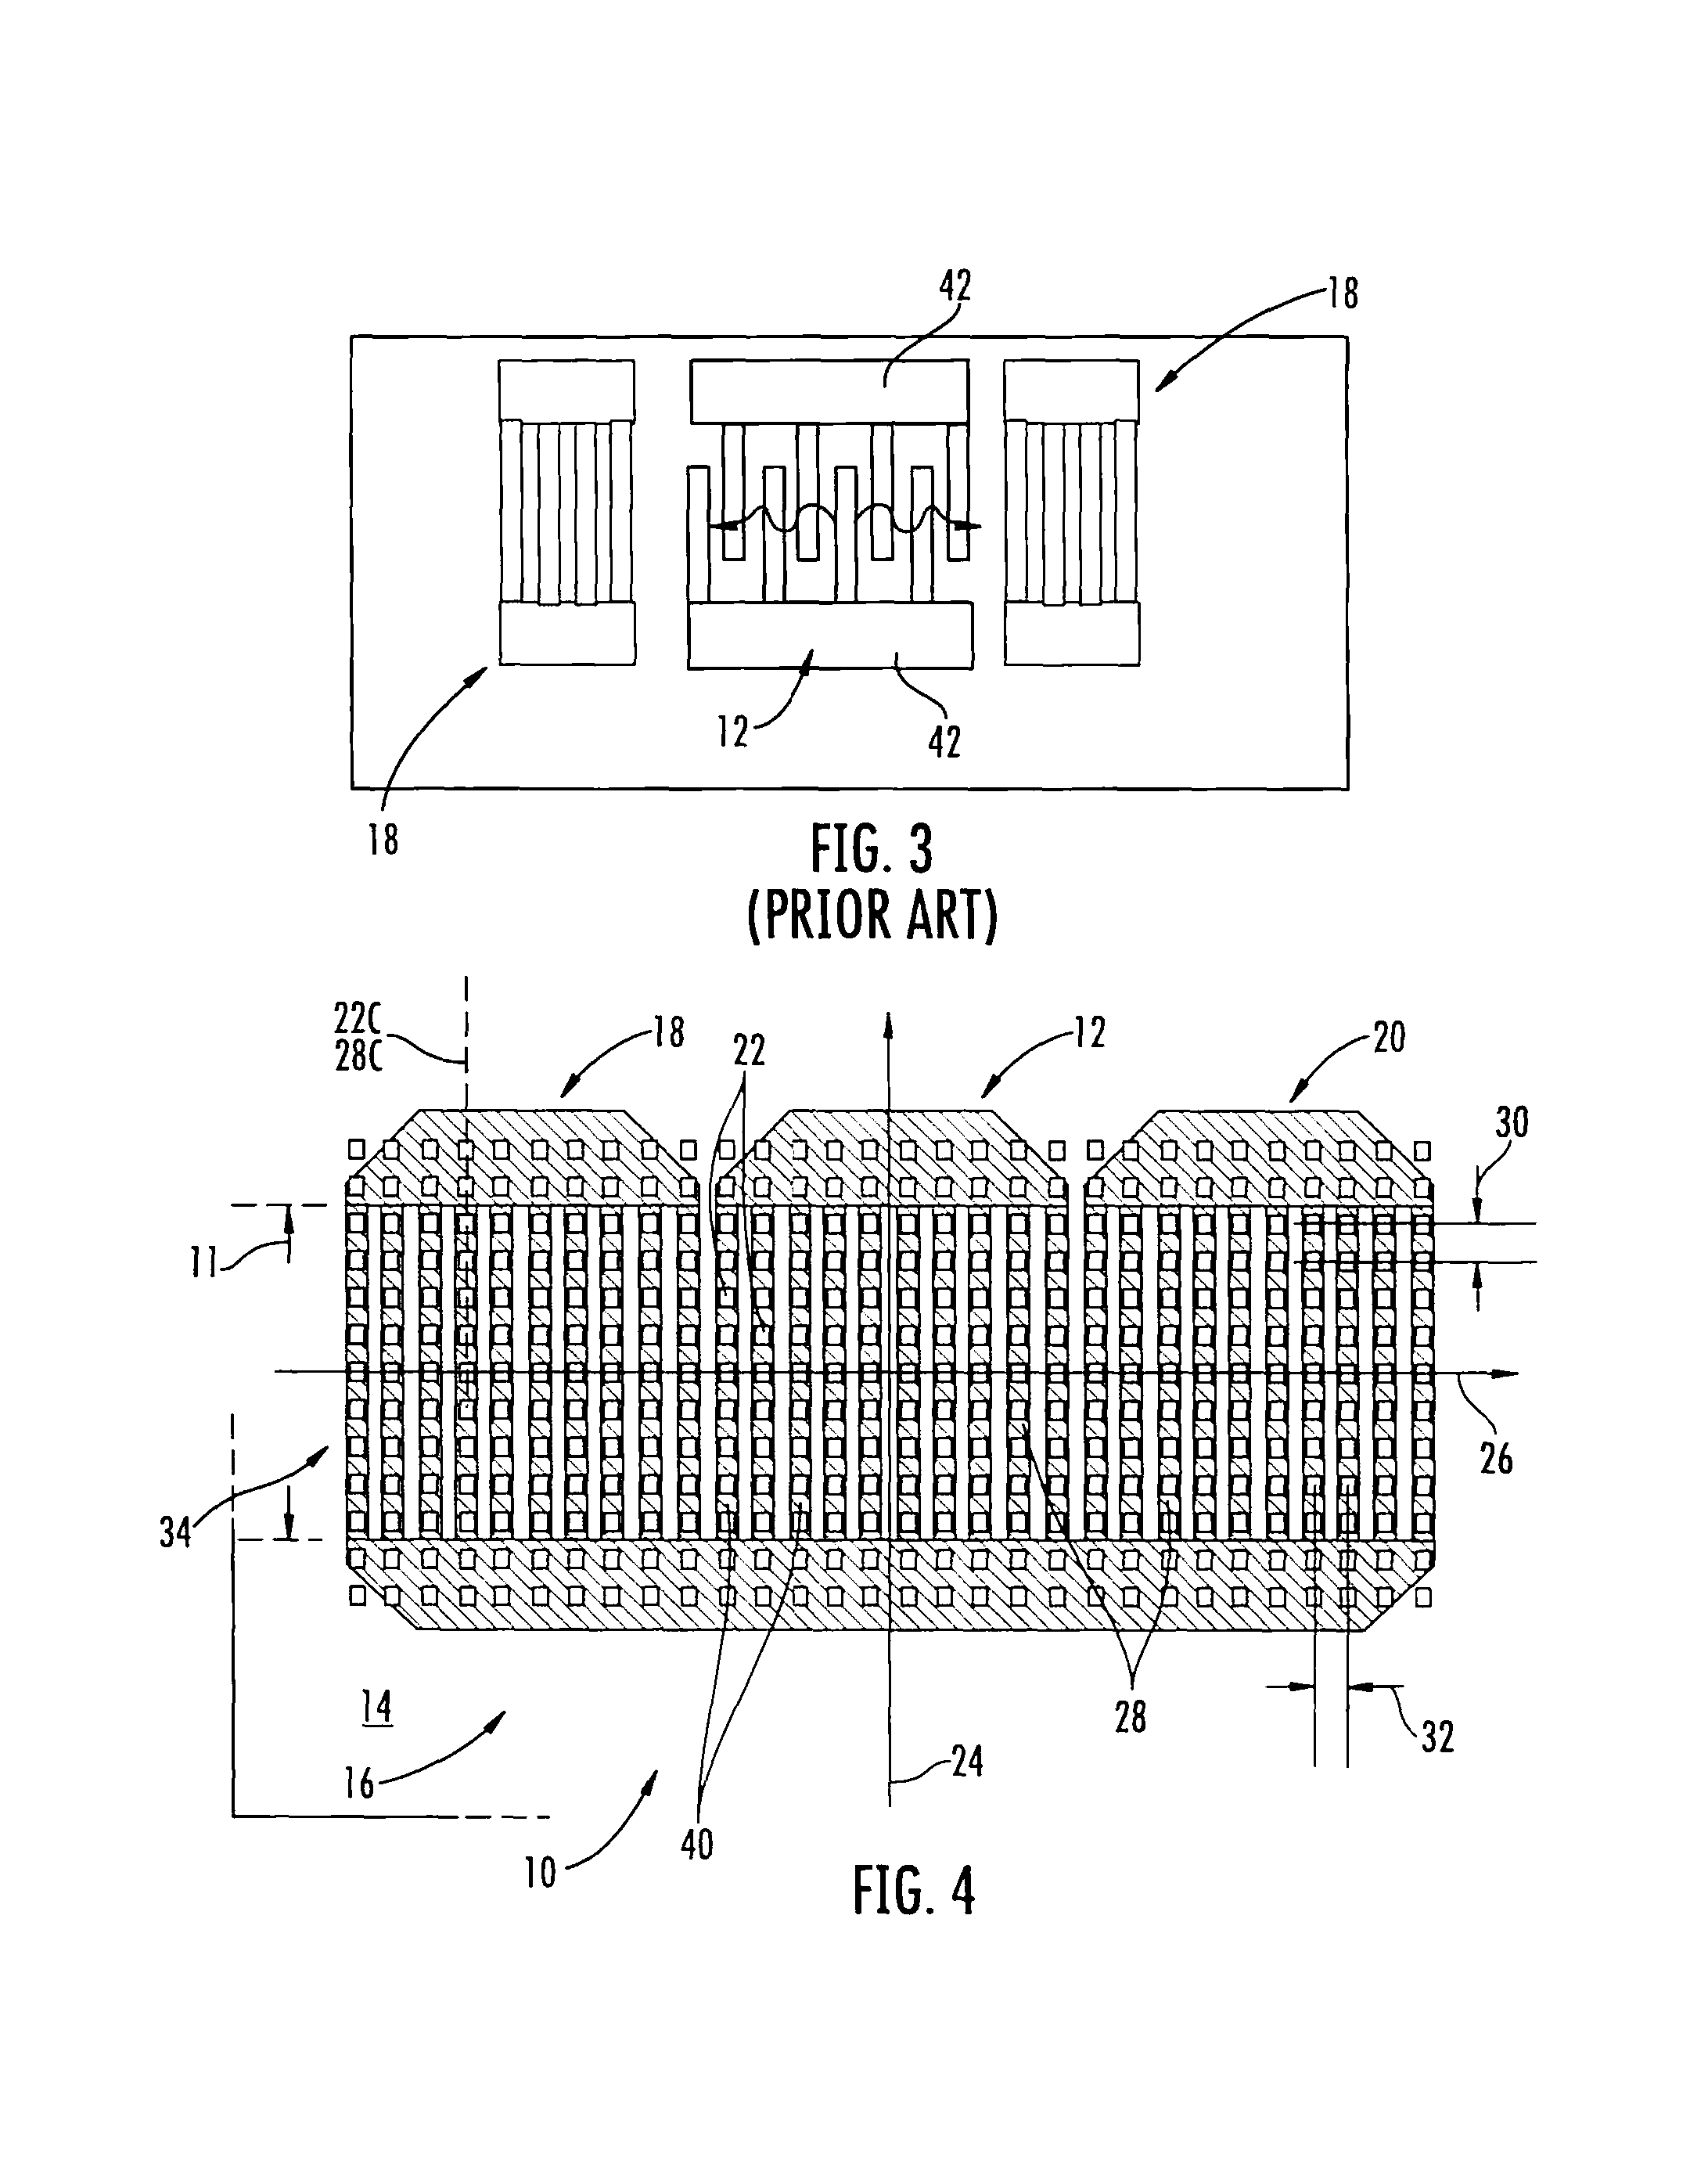 Acoustic wave device employing reflective elements for confining elastic energy